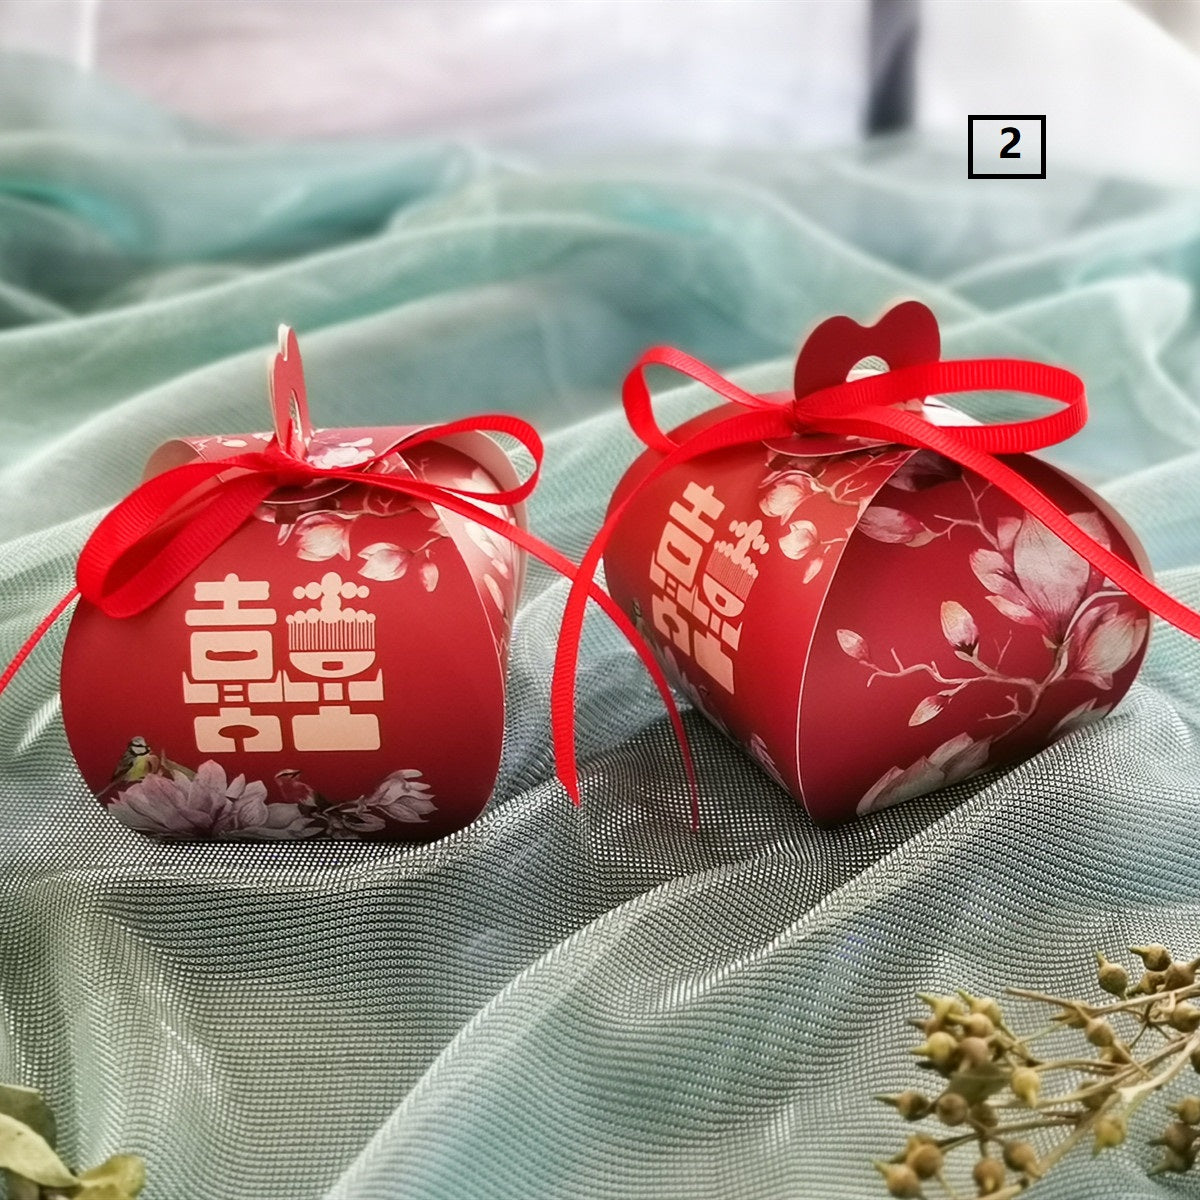 Red double happiness wedding favor box for Chinese or Vietnamese wedding